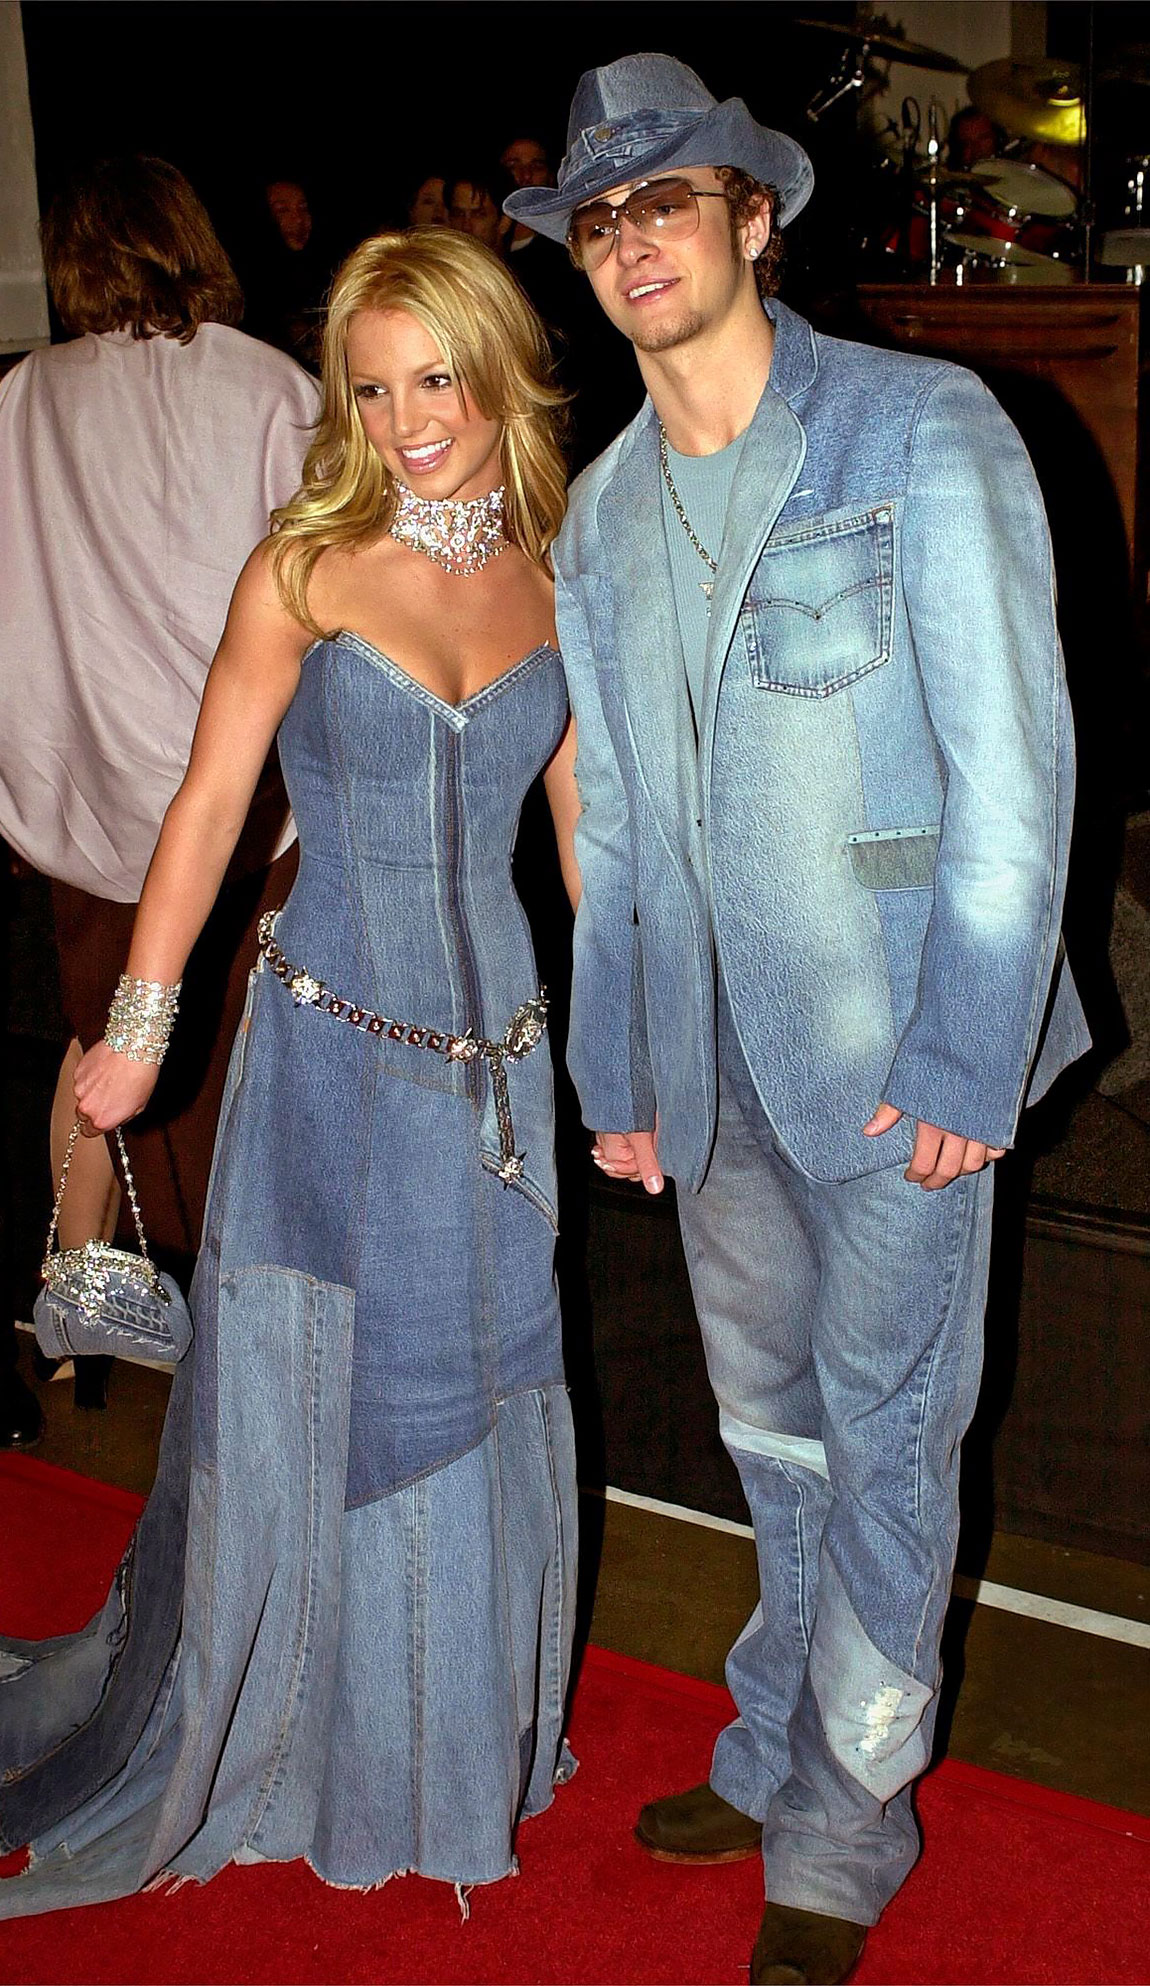 Britney Spears dancing to Justin Timberlake is a denim dream